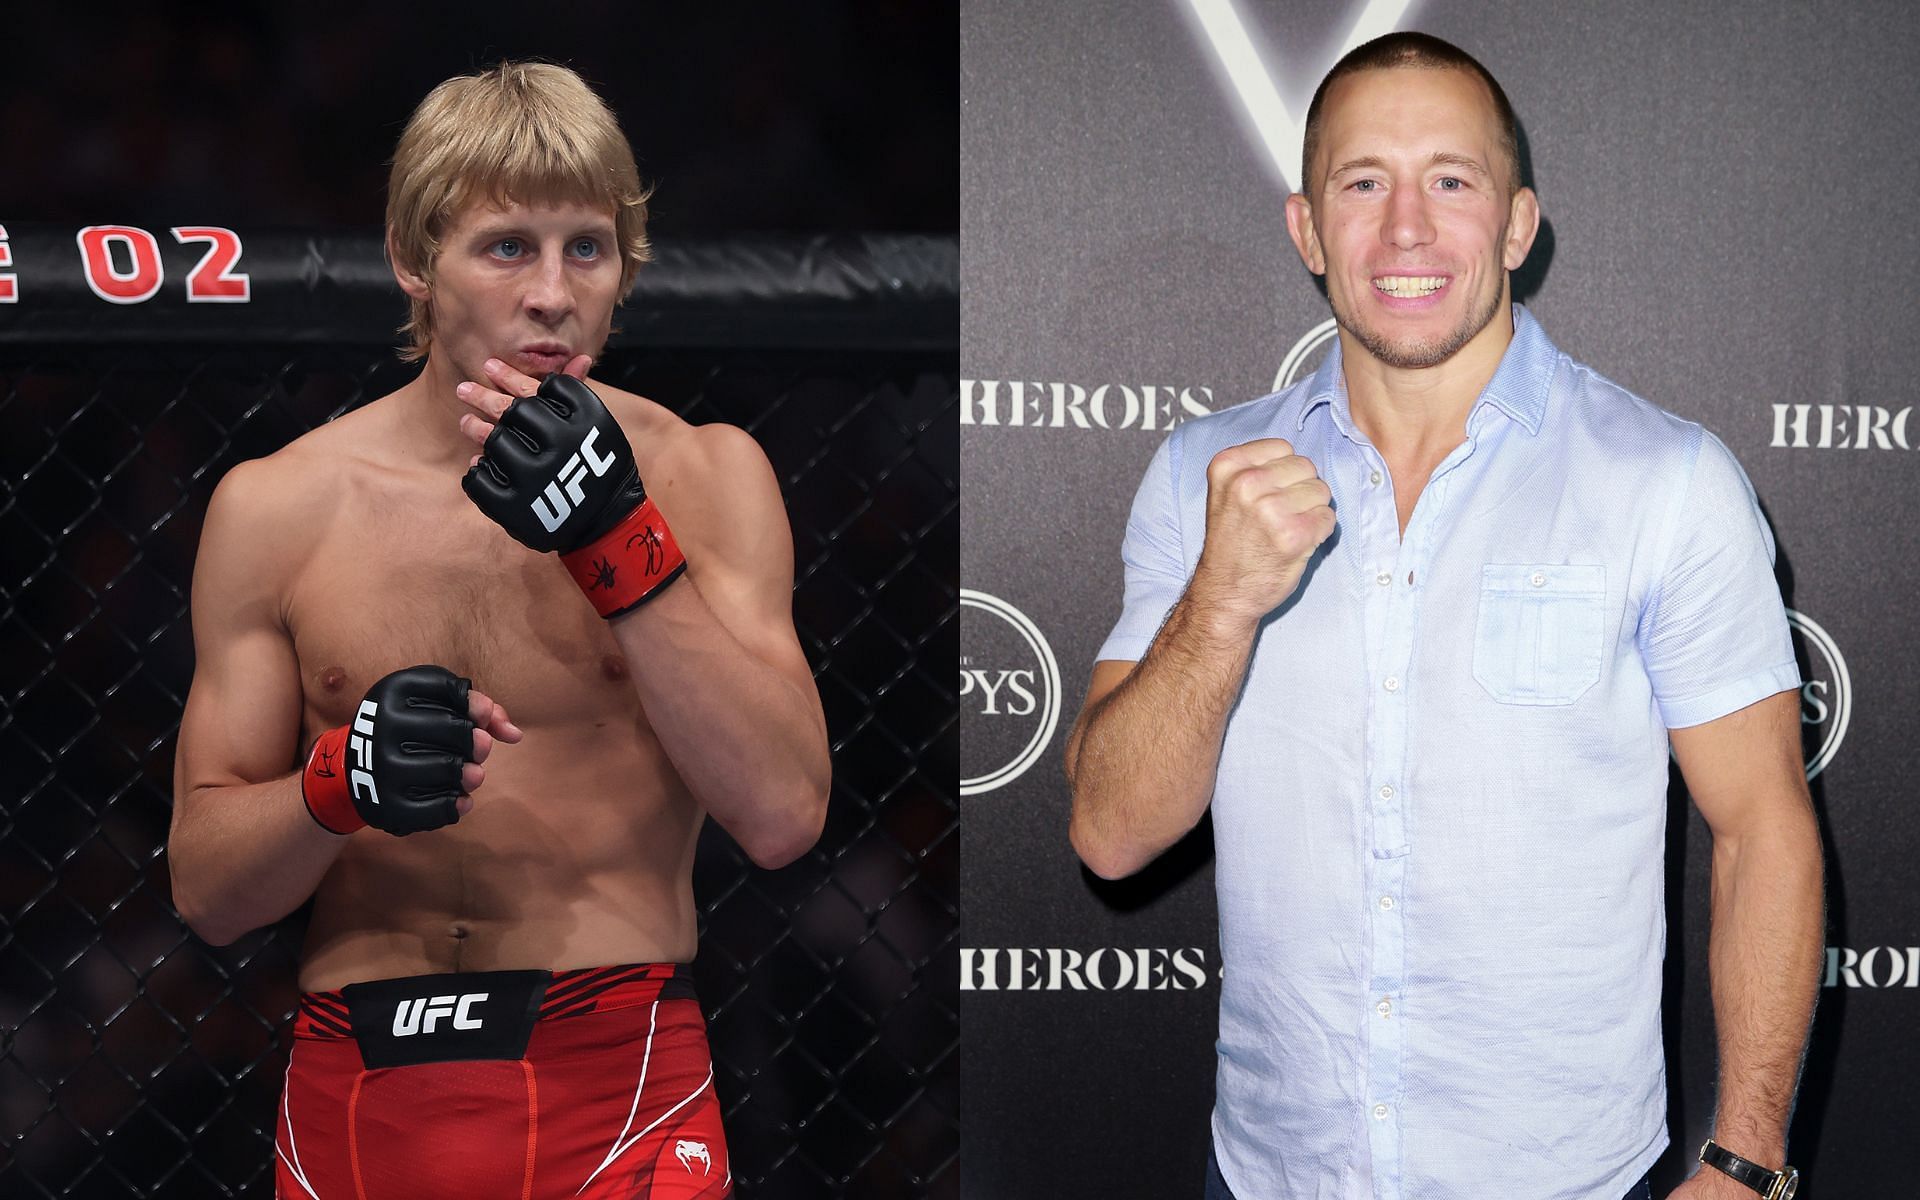 Paddy Pimblett (Left) and Georges St-Pierre (Right)